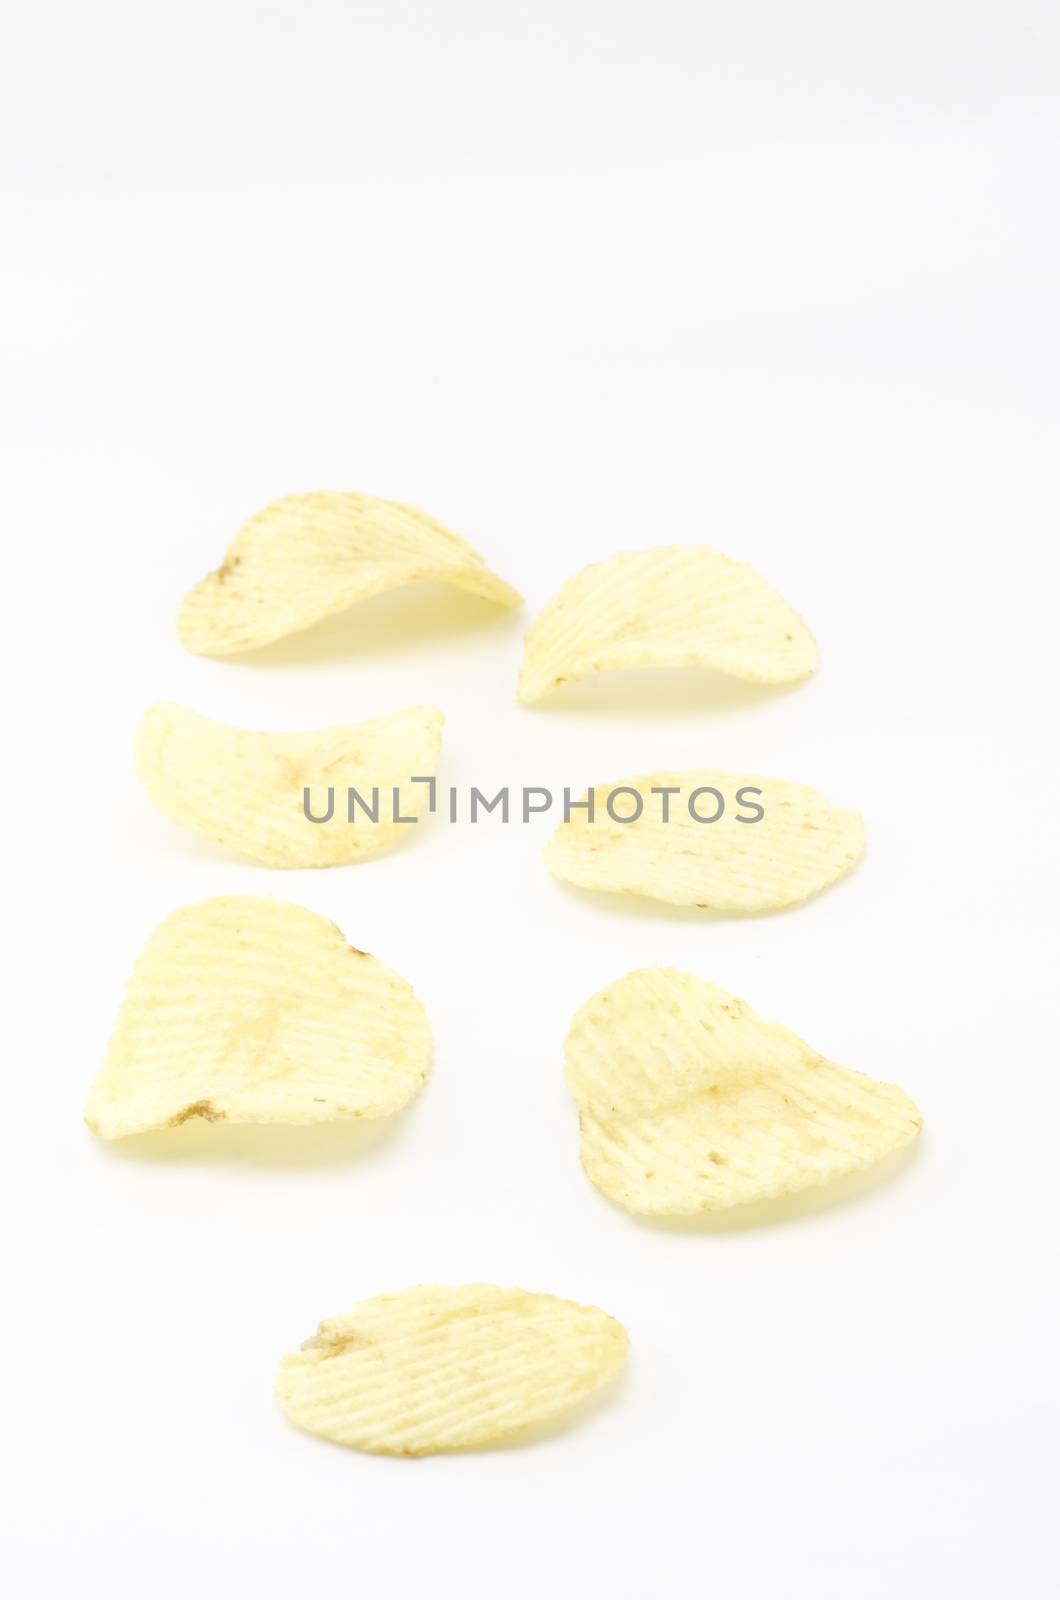 snack potato chips isolated on white background